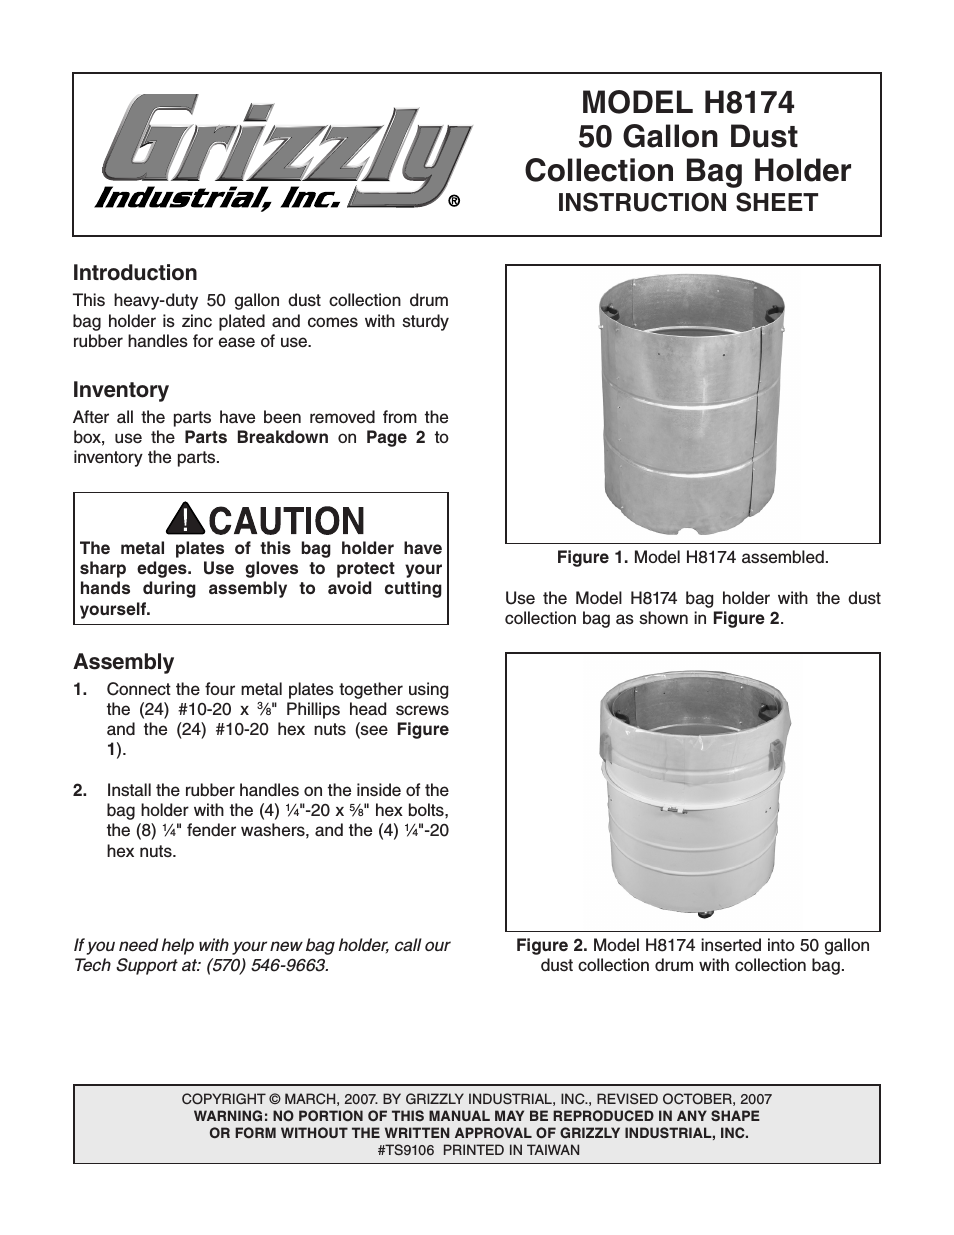 50 Gallon Dust Collection Bag Holder H8174